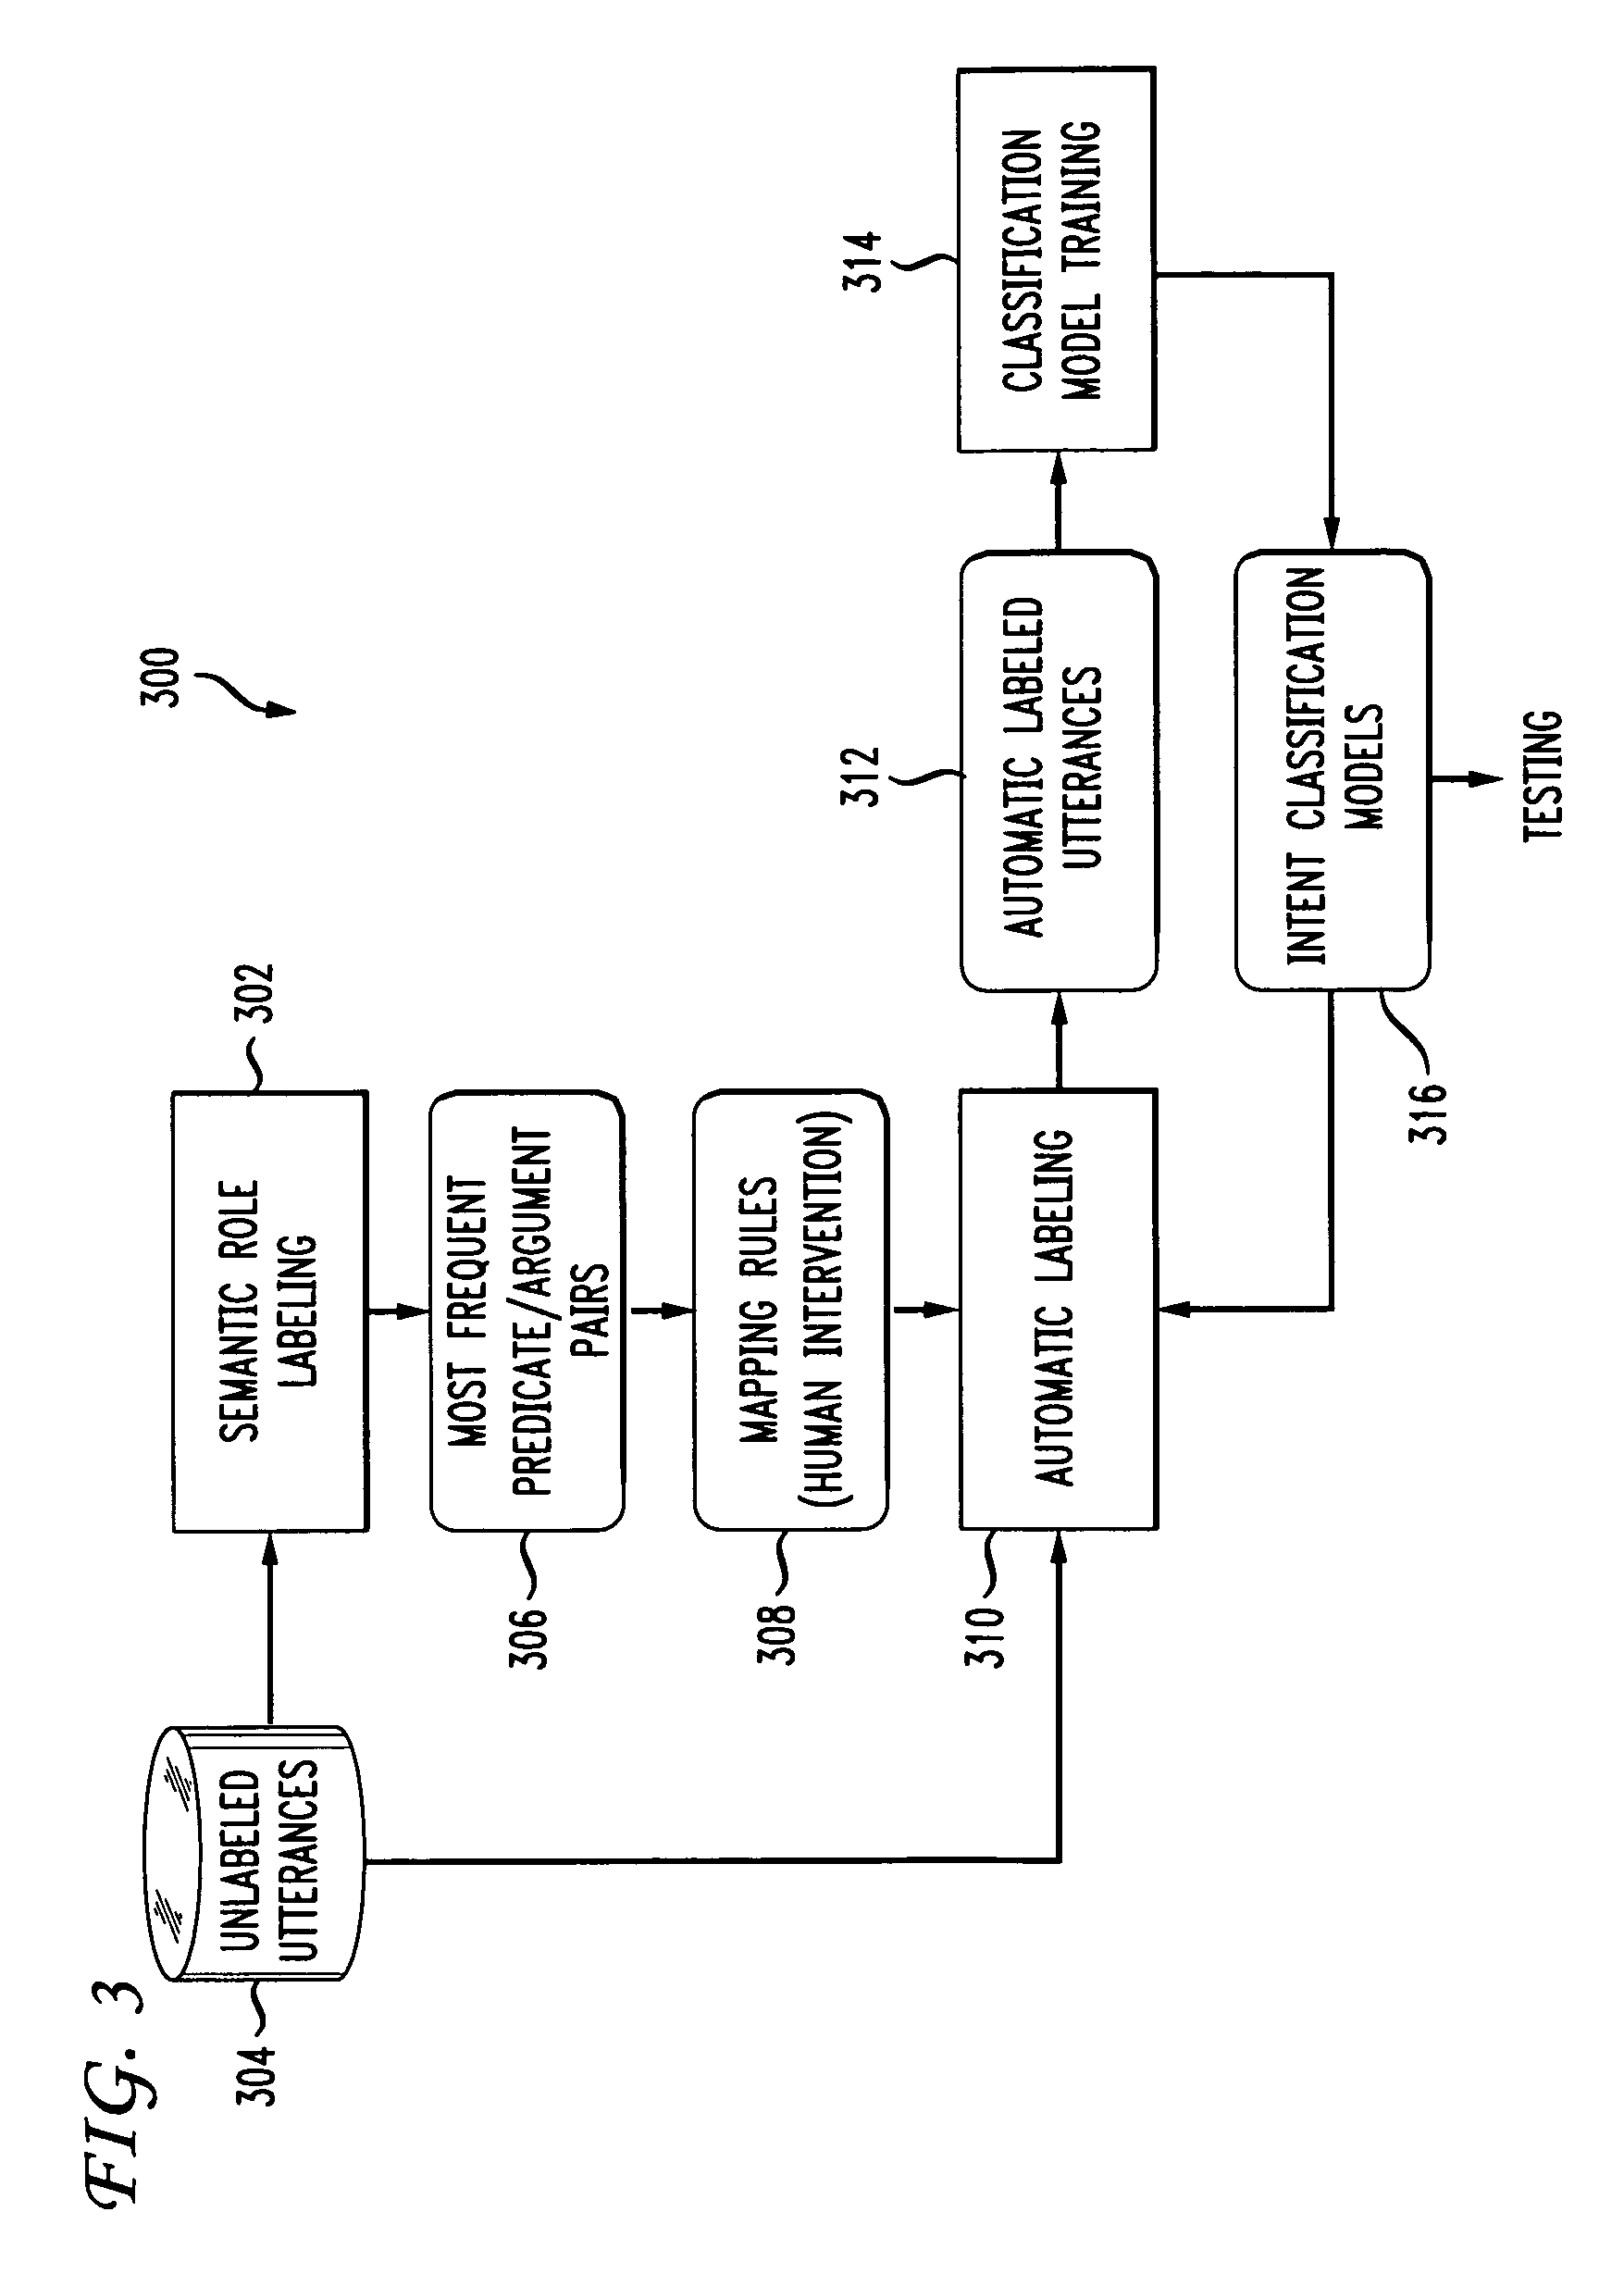 System and method of semi-supervised learning for spoken language understanding using semantic role labeling